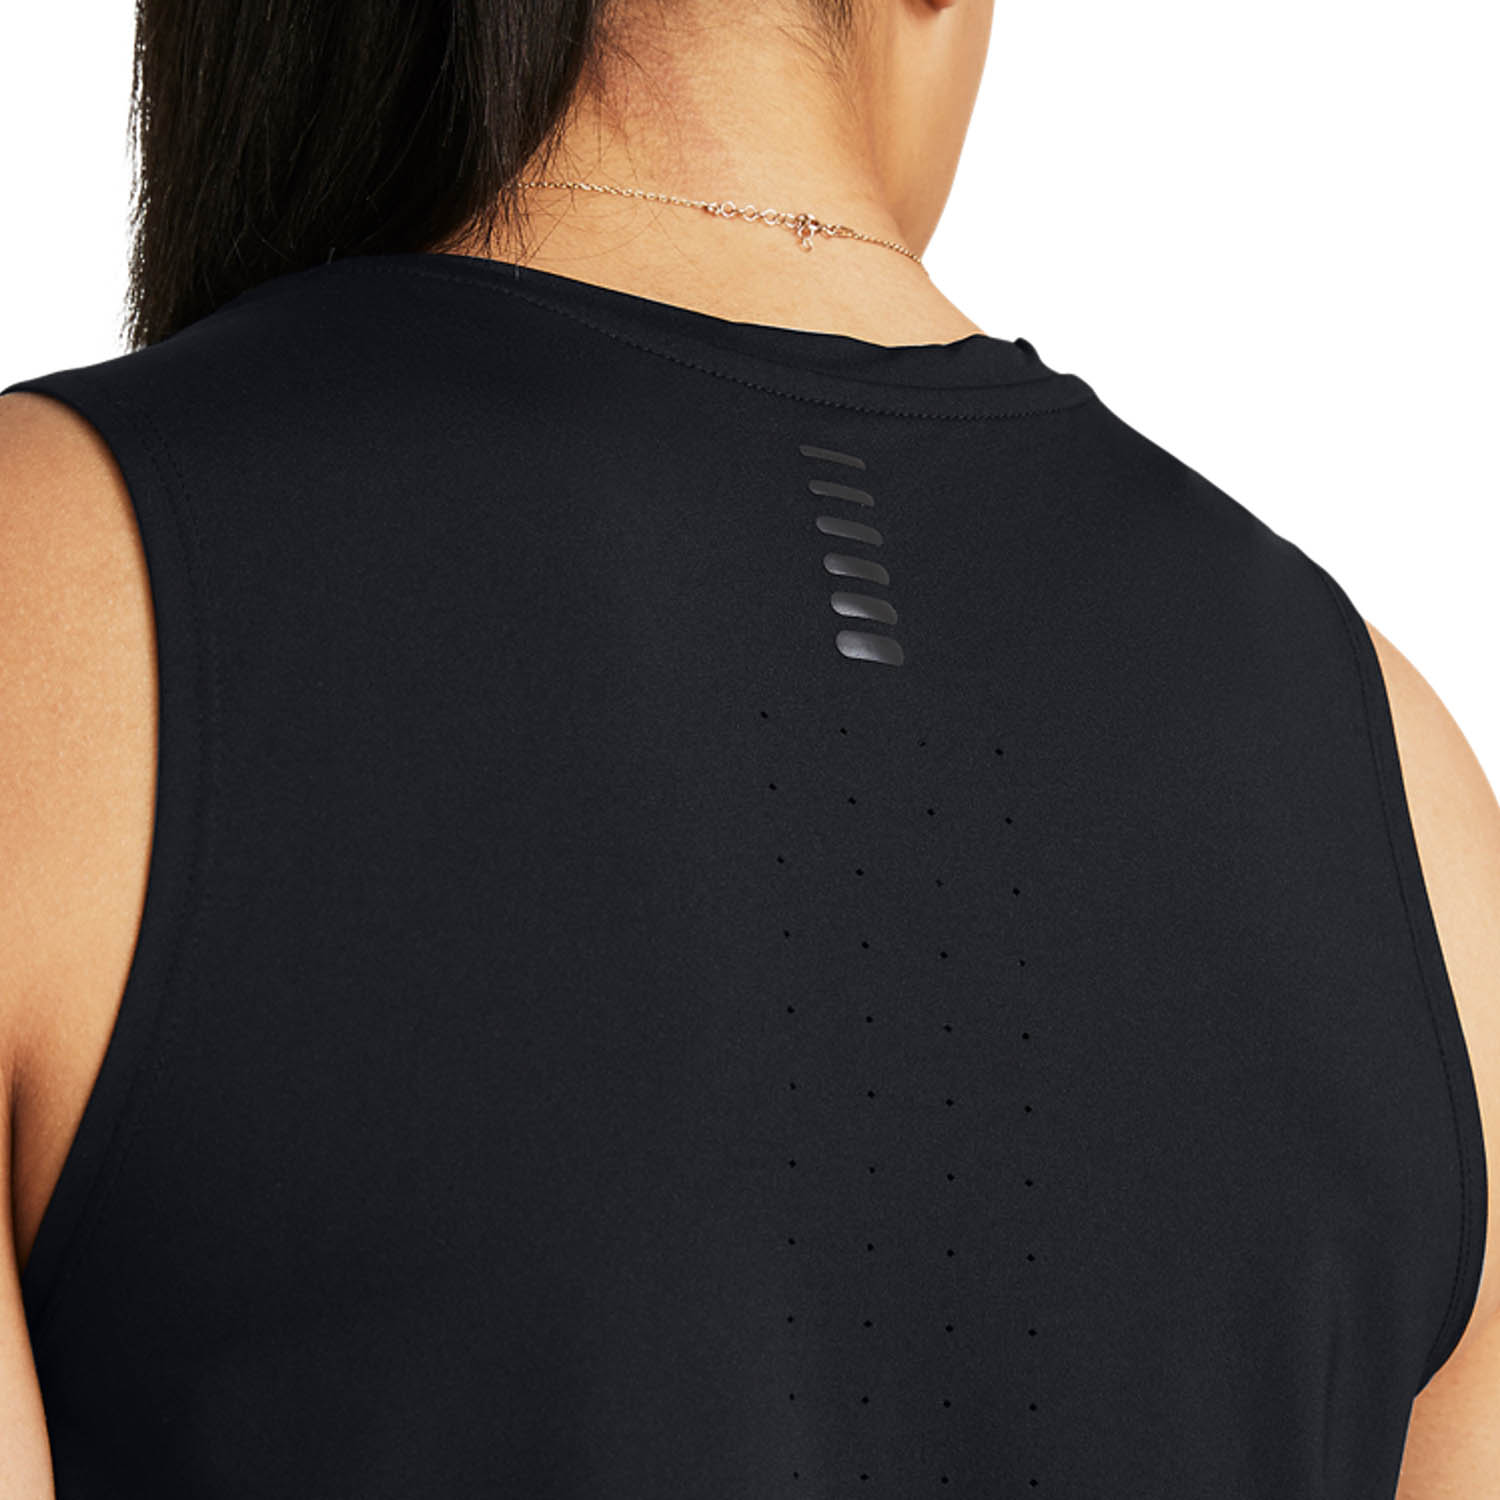 Under Armour ISO-Chill Laser Tank - Black/Reflective